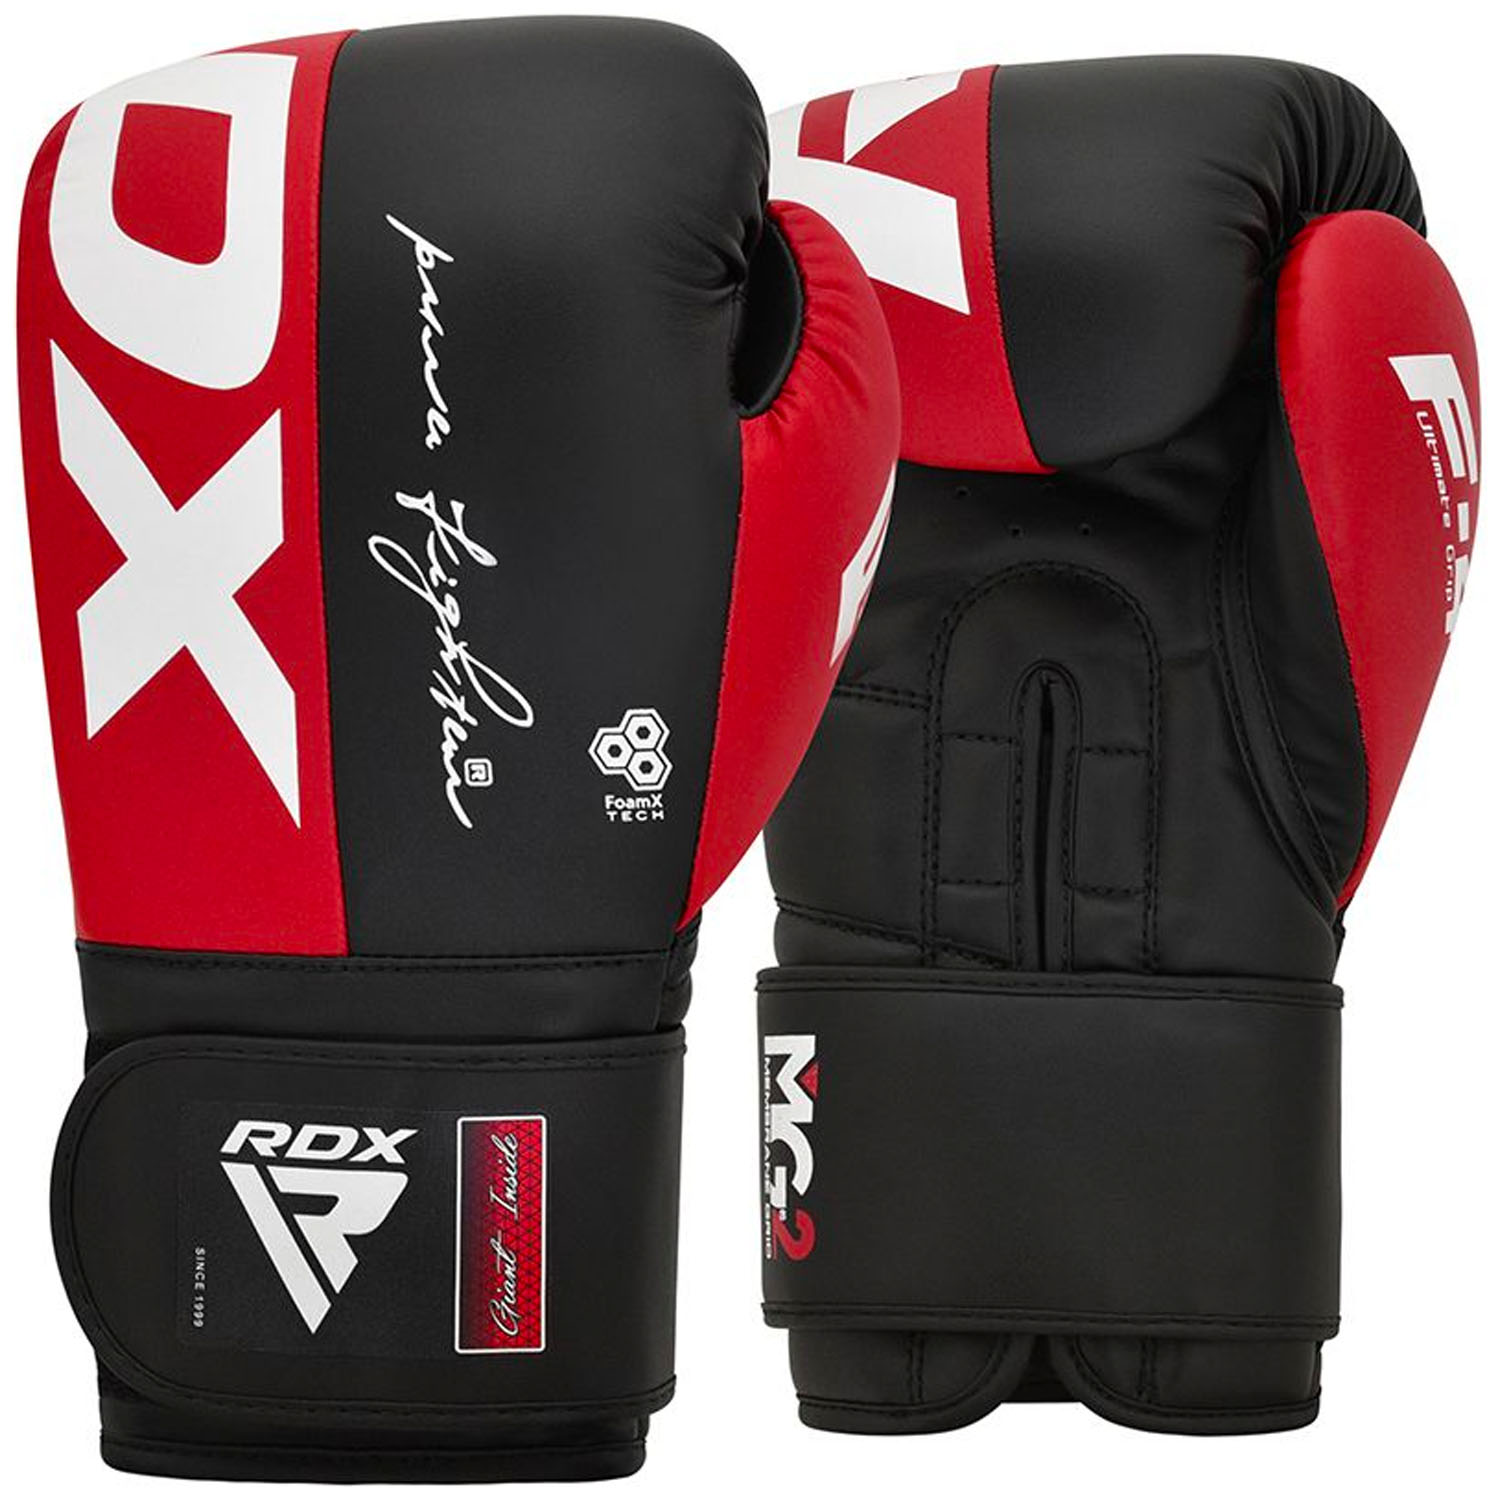 Boxing Gloves with low price - perfect for beginners and with great quality  shop now